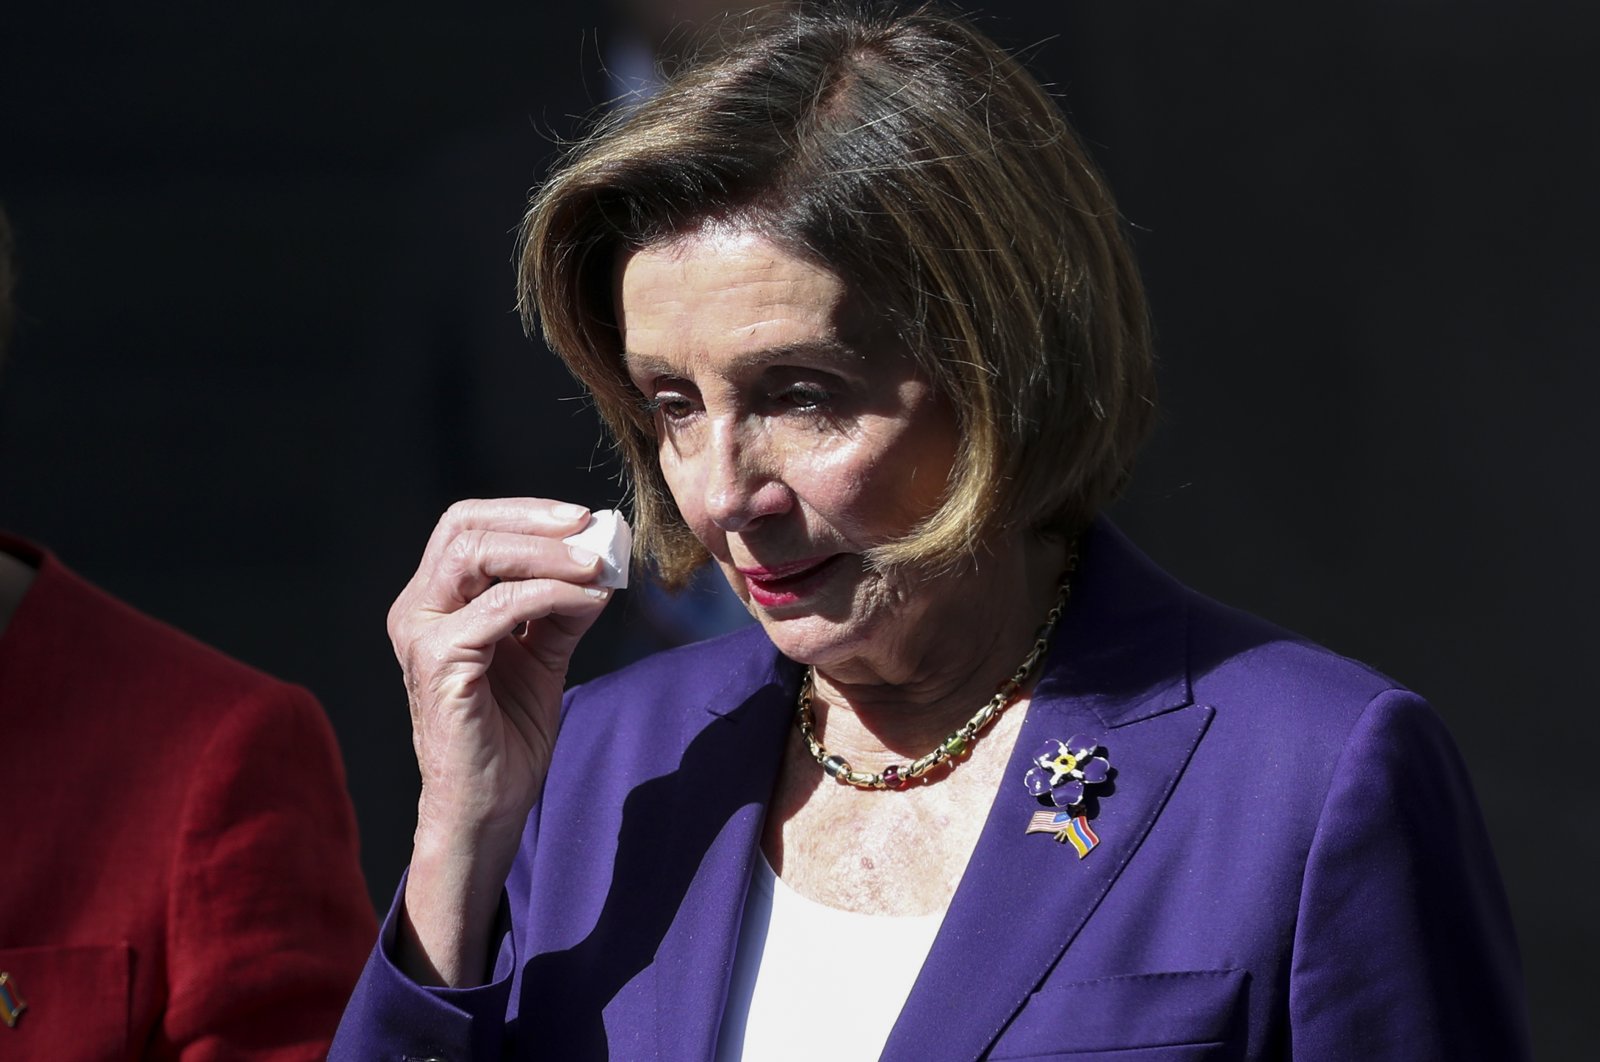 Speaker of the U.S. House of Representatives Nancy Pelosi reacts as she attends a laying ceremony at the monument to the victims of the 1915 events, Yerevan, Armenia, Sept. 18, 2022. (AP Photo)